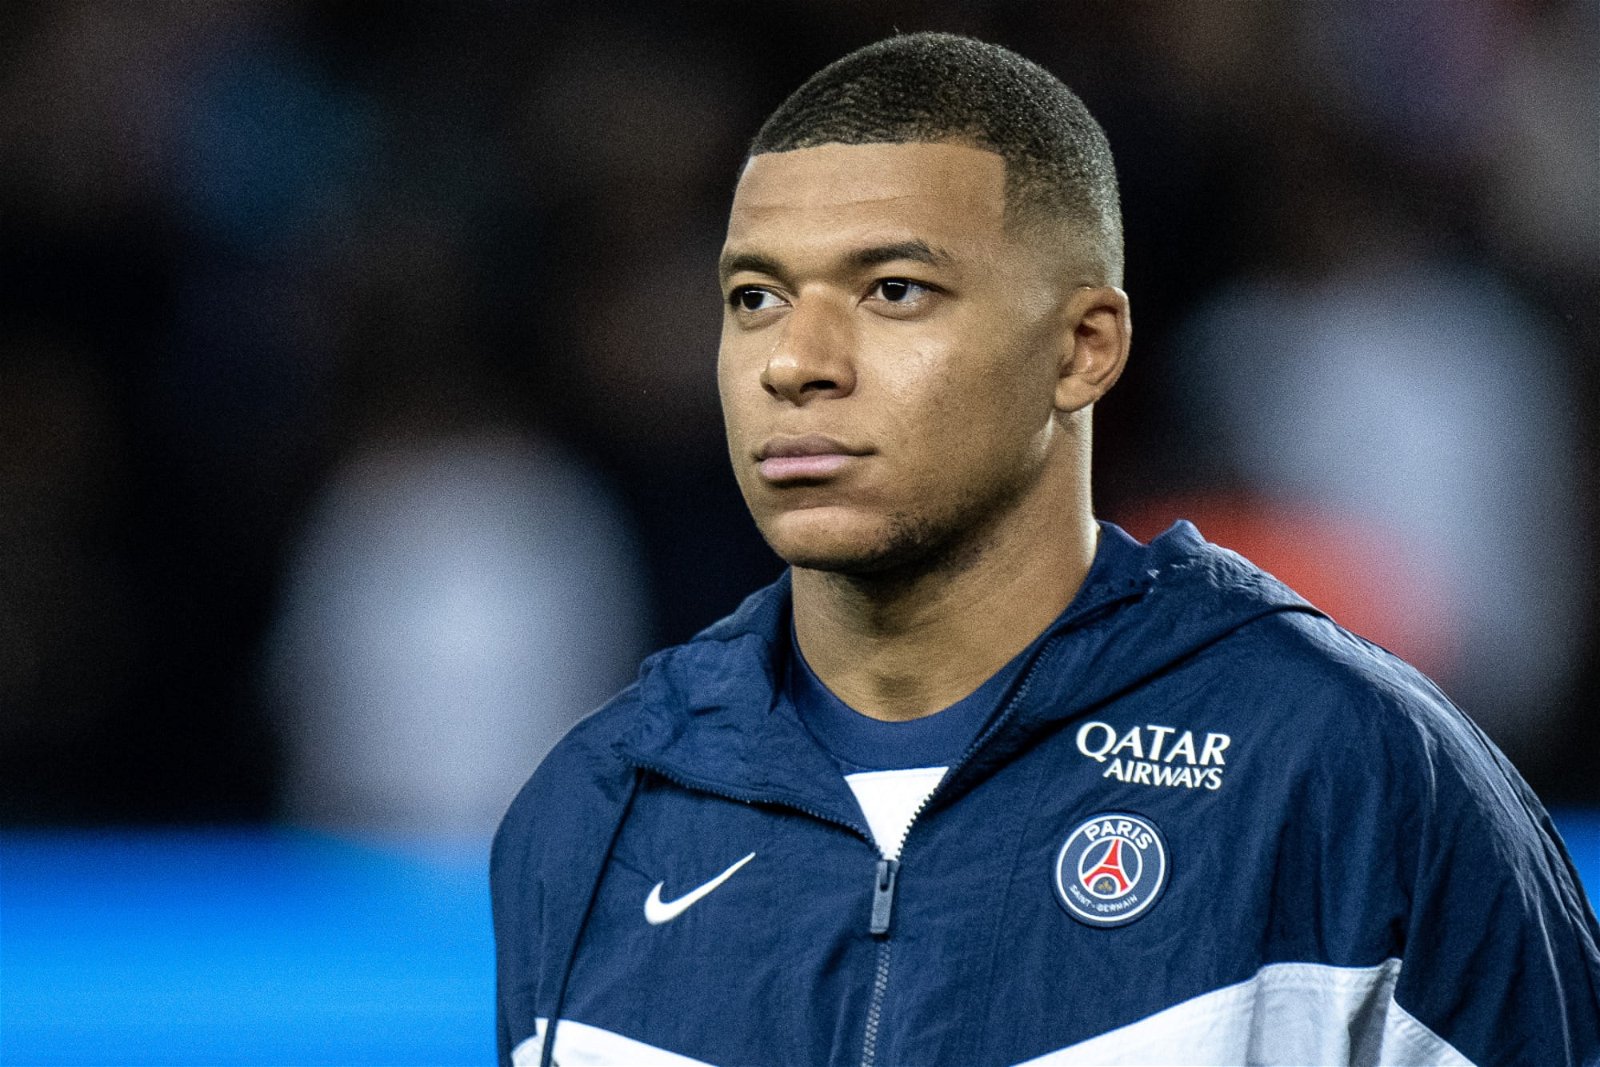 Kylian Mbappe is the second highest paid footballer